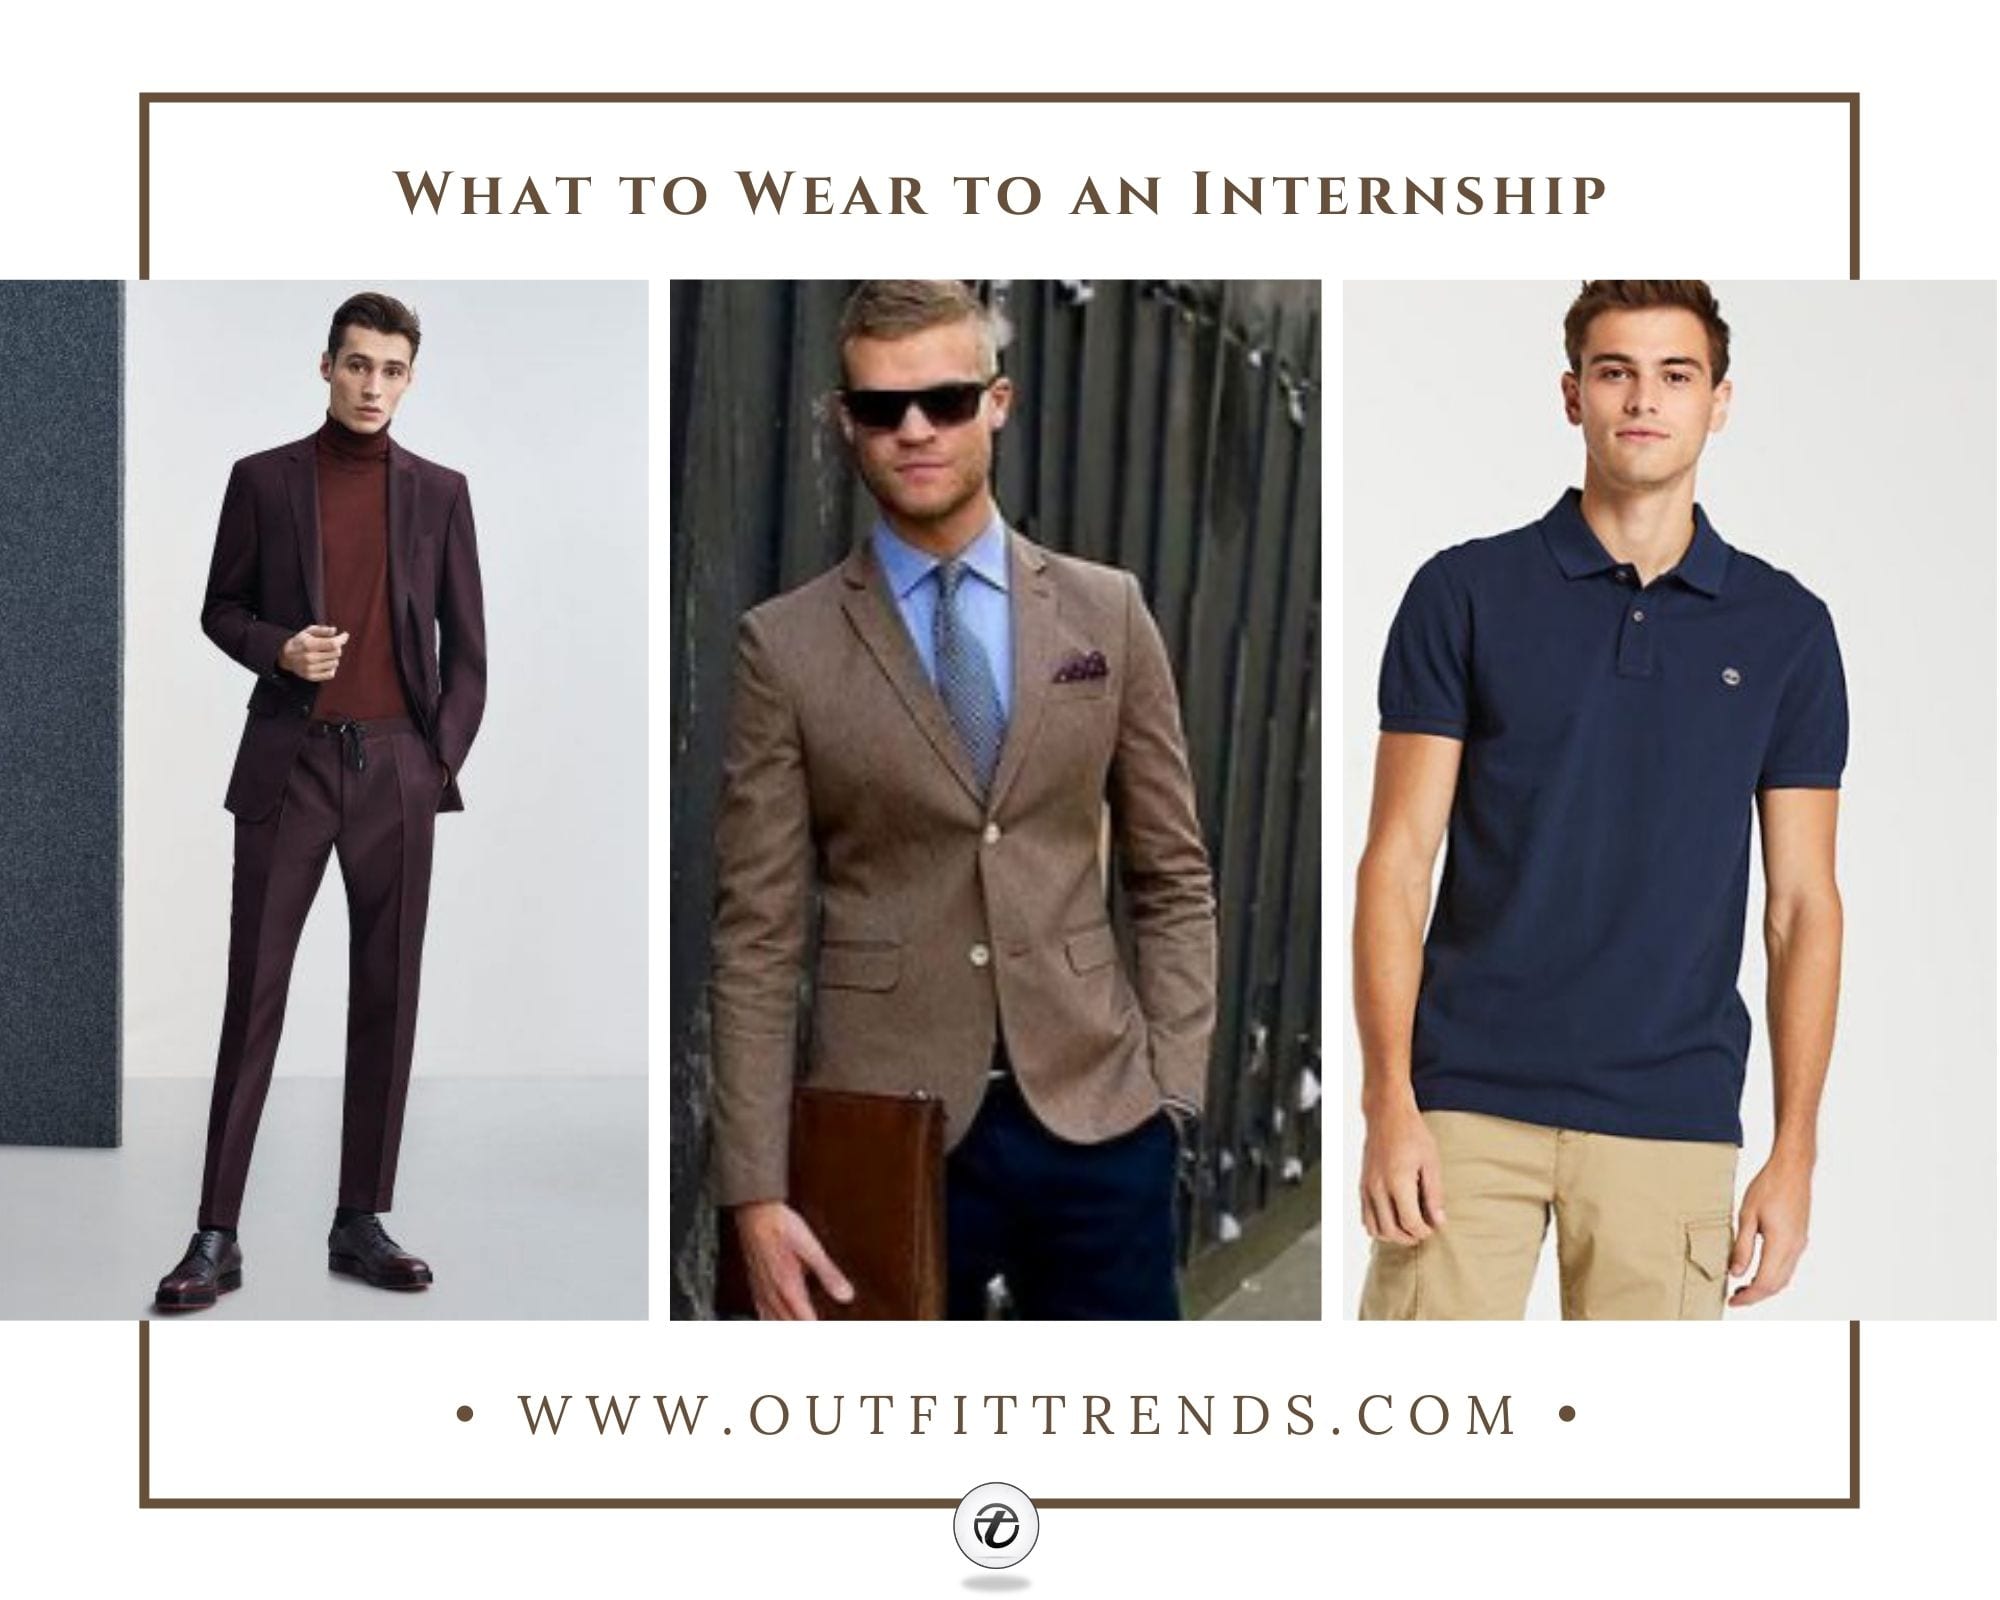 16 Internship Outfits for Men to Look Their Best at Work